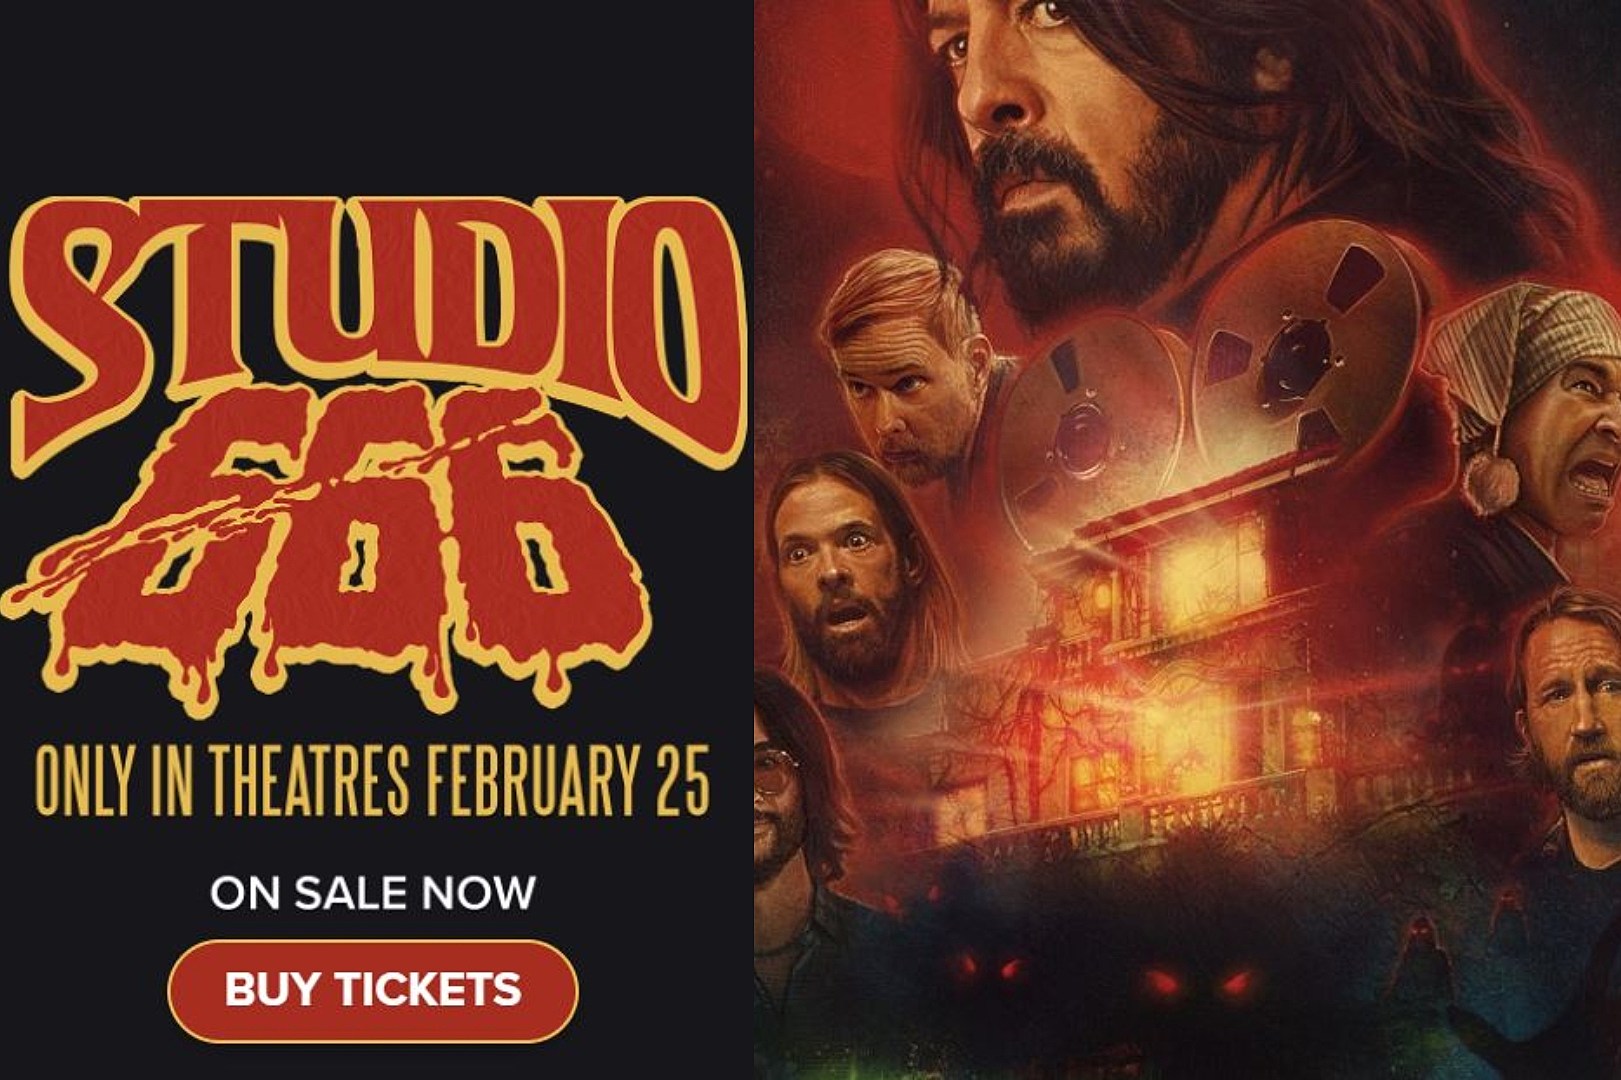 Watch the Trailer for the Foo Fighters' 'Studio 666' Film